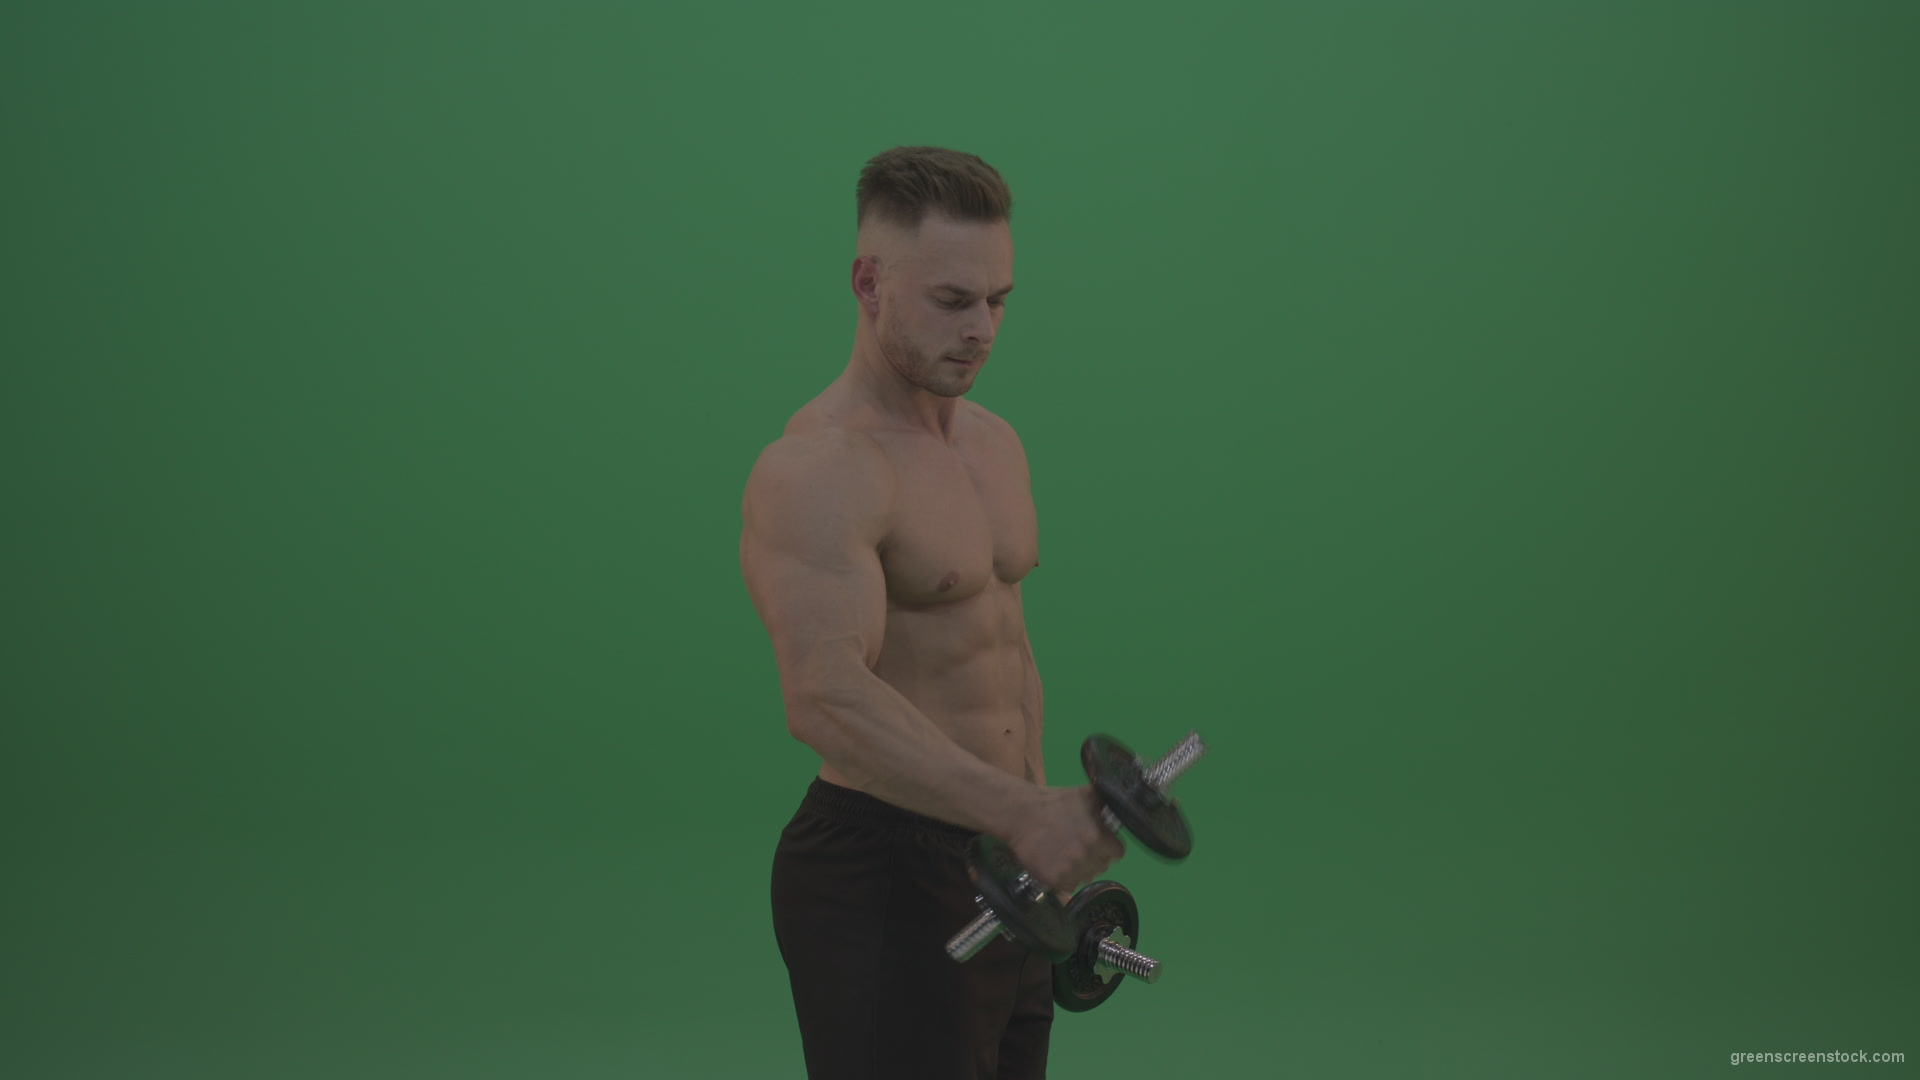 vj video background Young_Bodybuilder_Working_Out_Two_Handed_Dumbbell_Push_Ups_Excercise_On_Green_Screen_Wall_Background_003